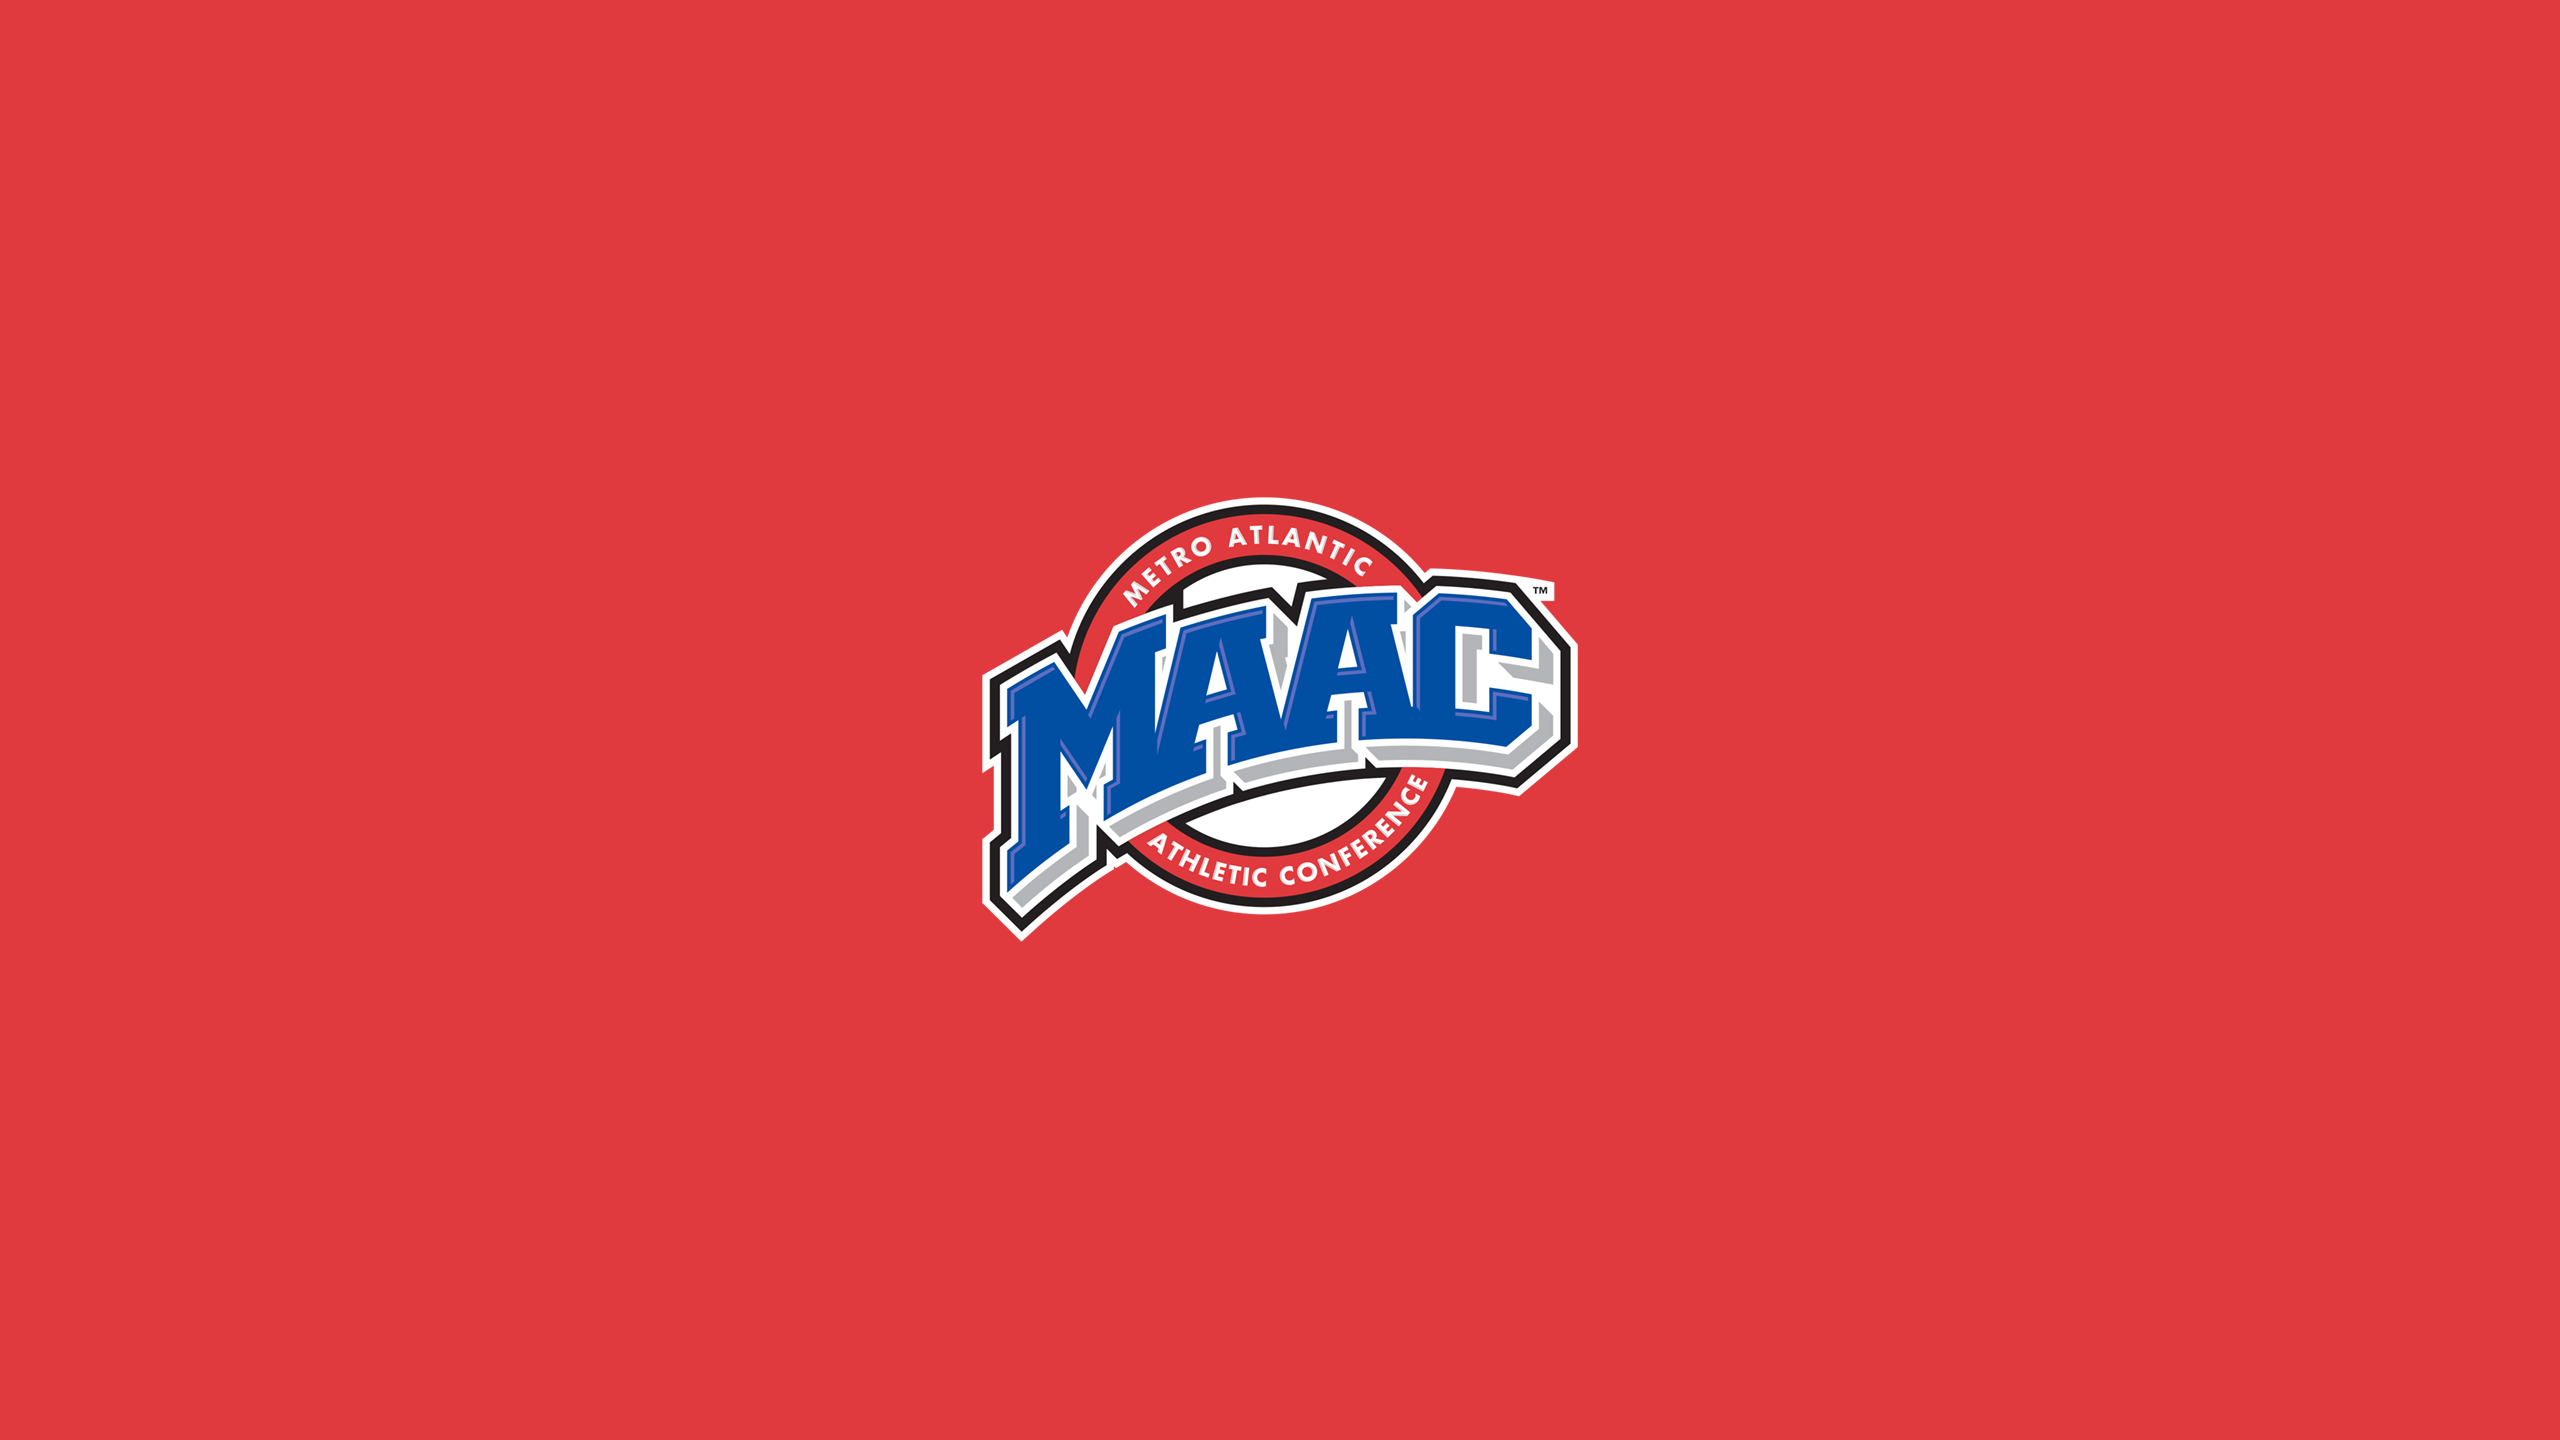 Metro Atlantic Athletic Conference - NCAAB - Square Bettor